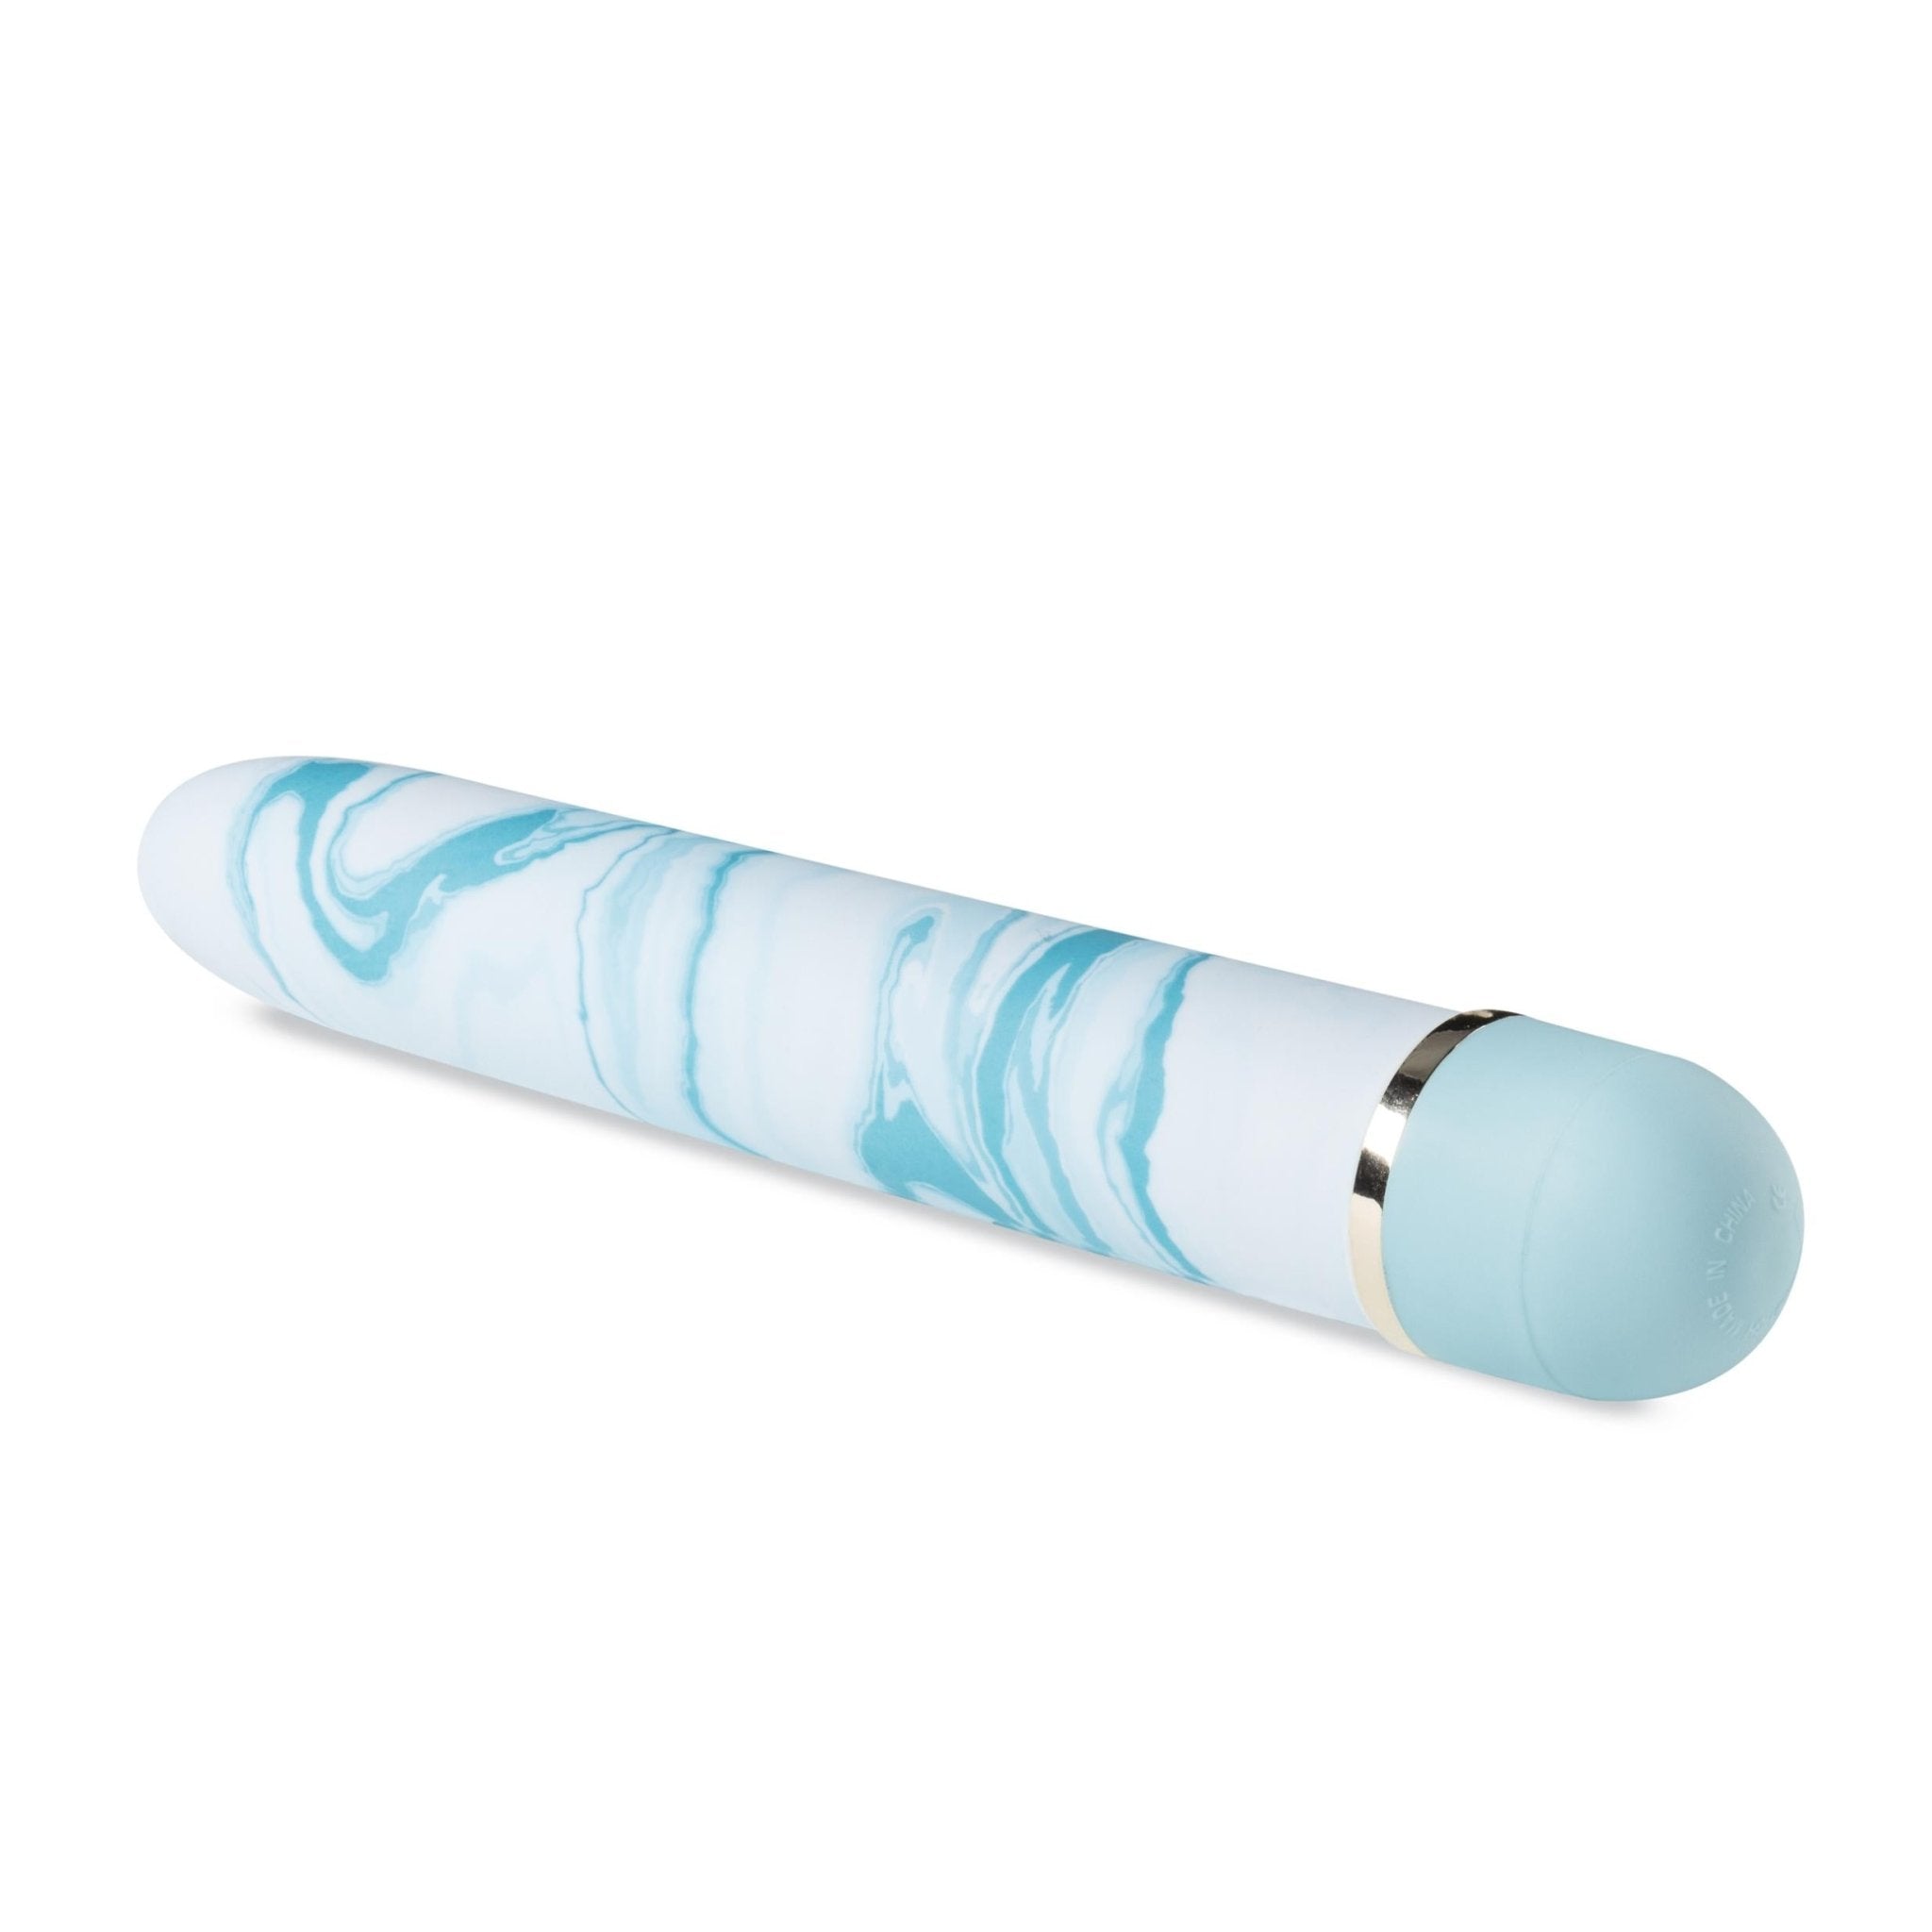 Blueberry Haze Collection: Classic Vibrator by Blush